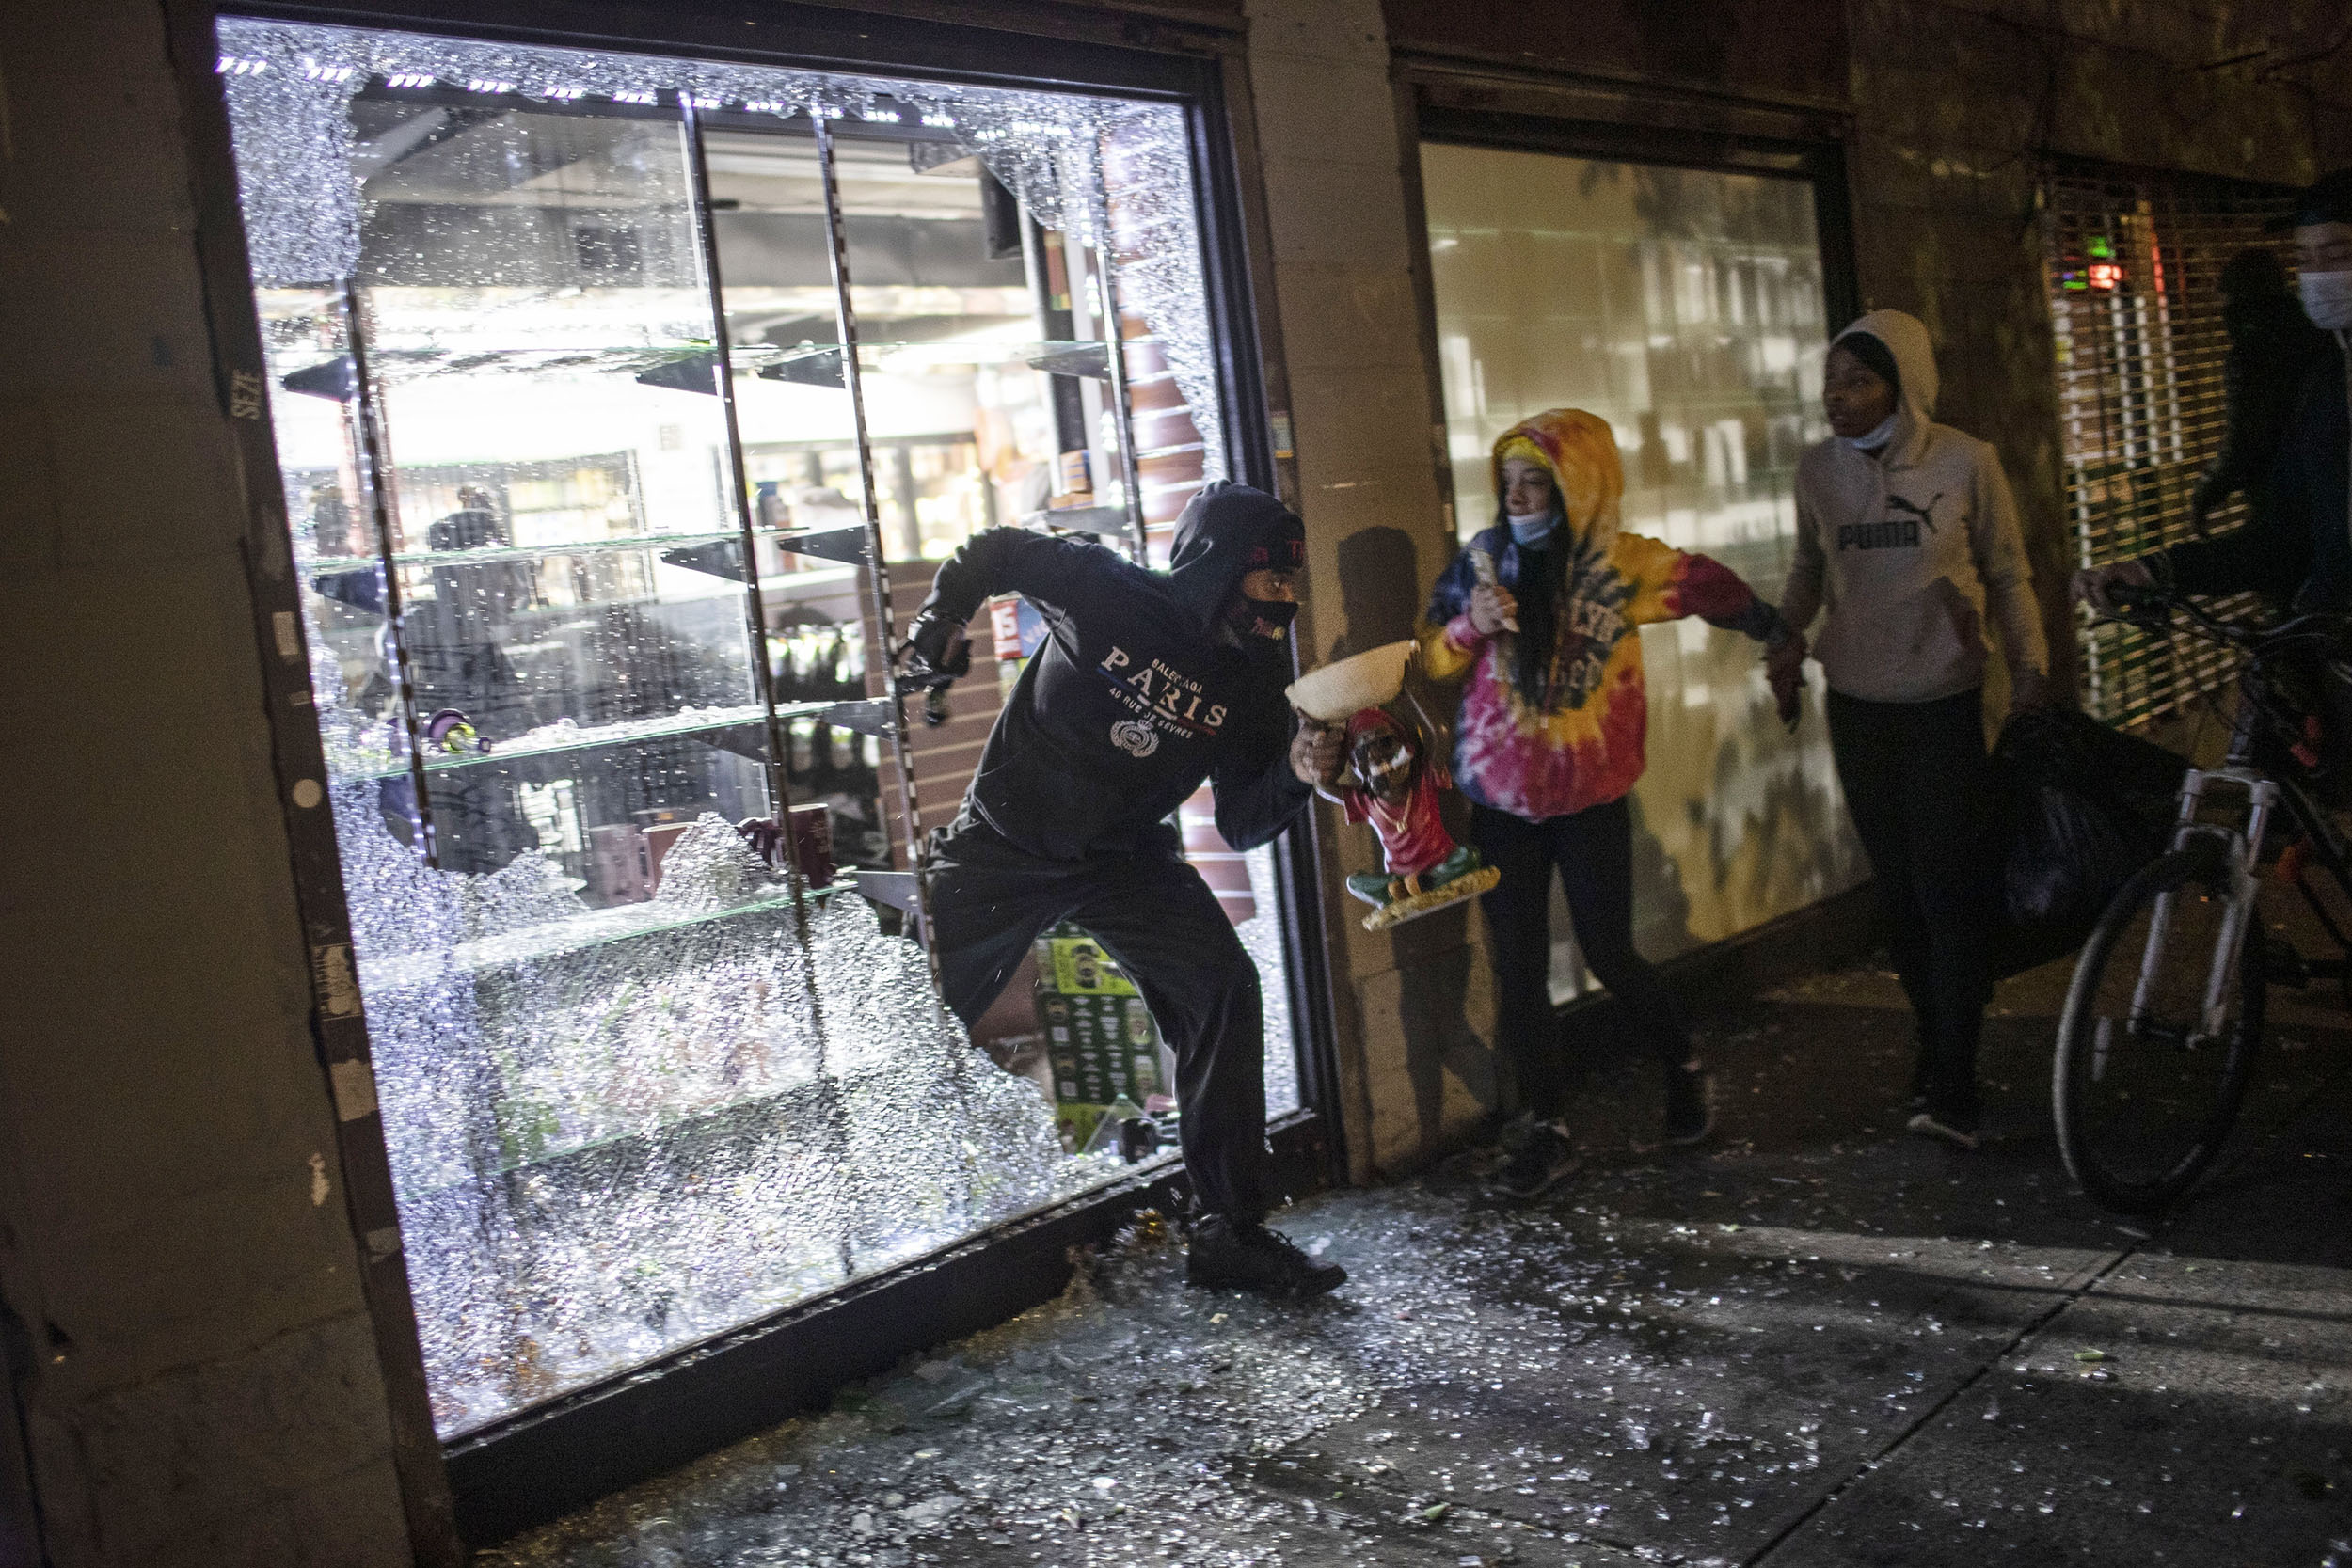 People run out of a smoke shop with smoking instruments after breaking in as police arrive in New York, on Monday, June 1. 